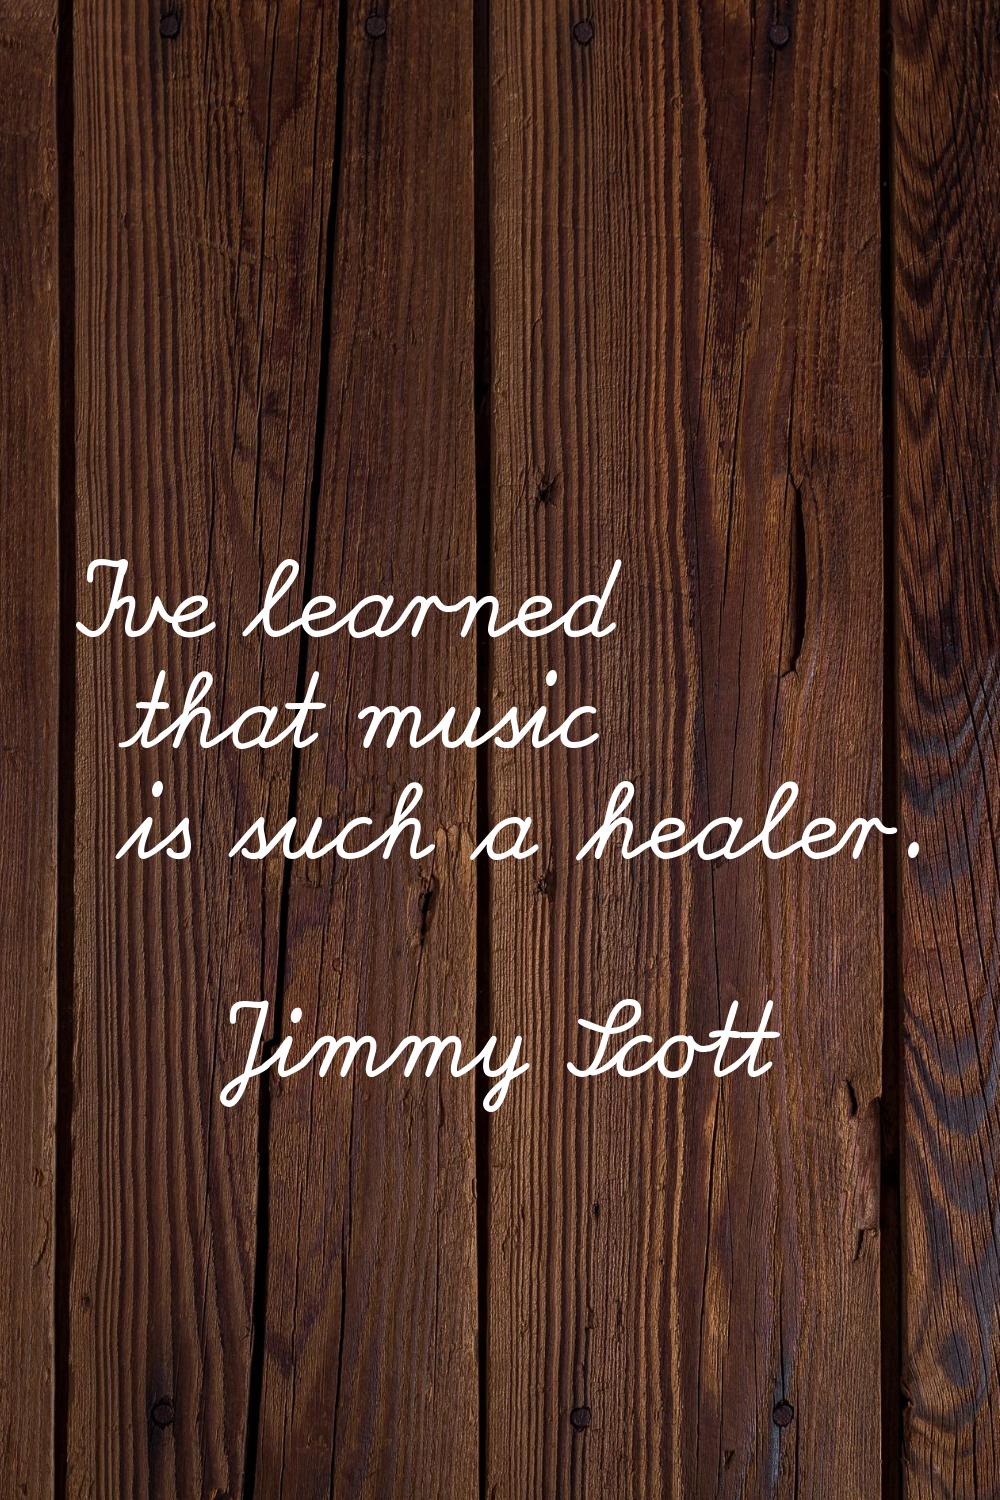 I've learned that music is such a healer.